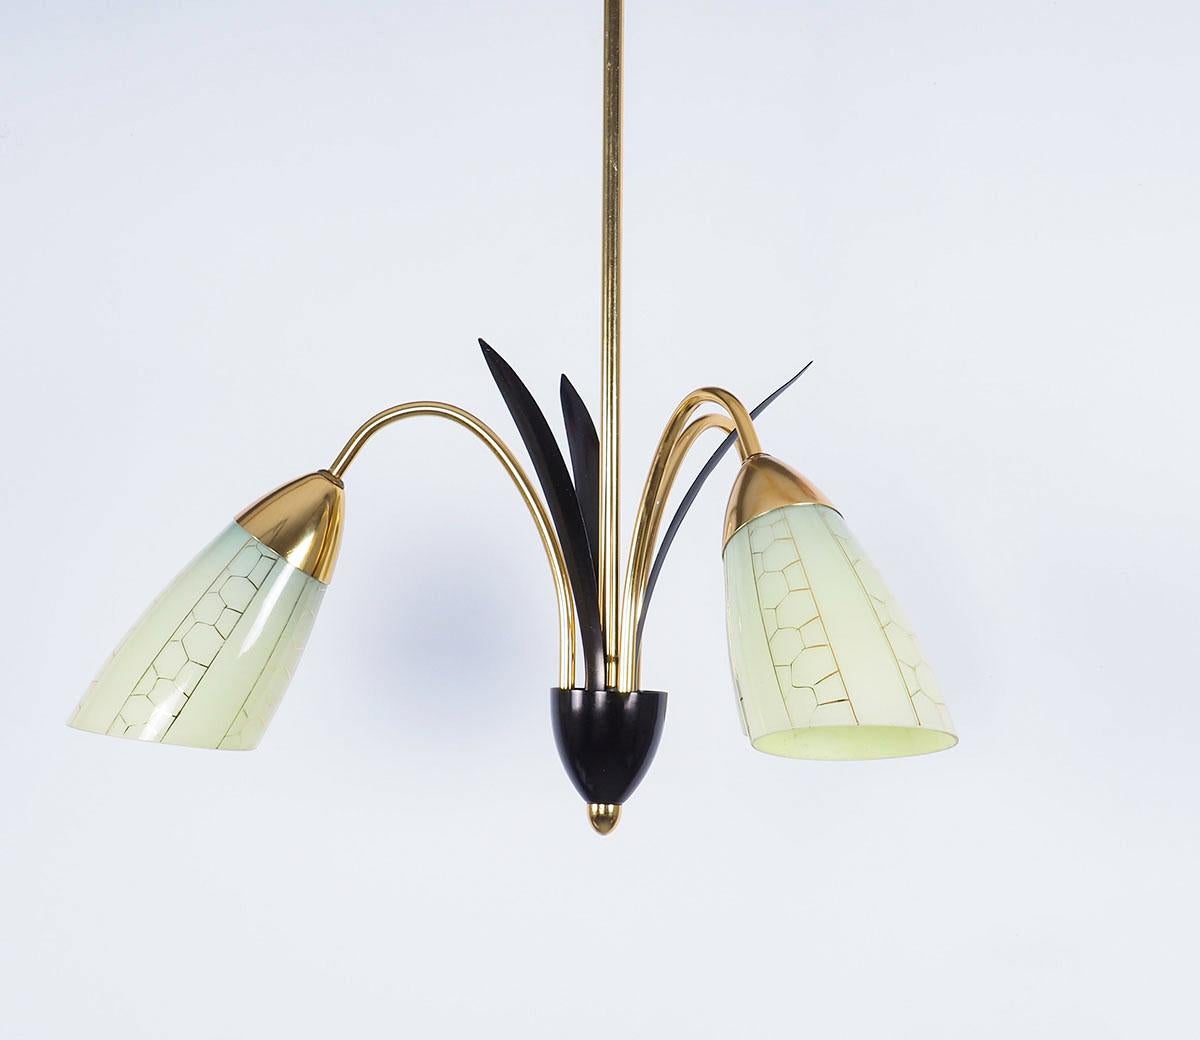 Brass chandelier with 3 green glass shades from the 1950s.

The lamp has 3 brass arms with 3 black metal leaves in between.

The opaline shades have a greenish yellow color with a fine honeycomb decor in gold.

Very elegant lamp due to the